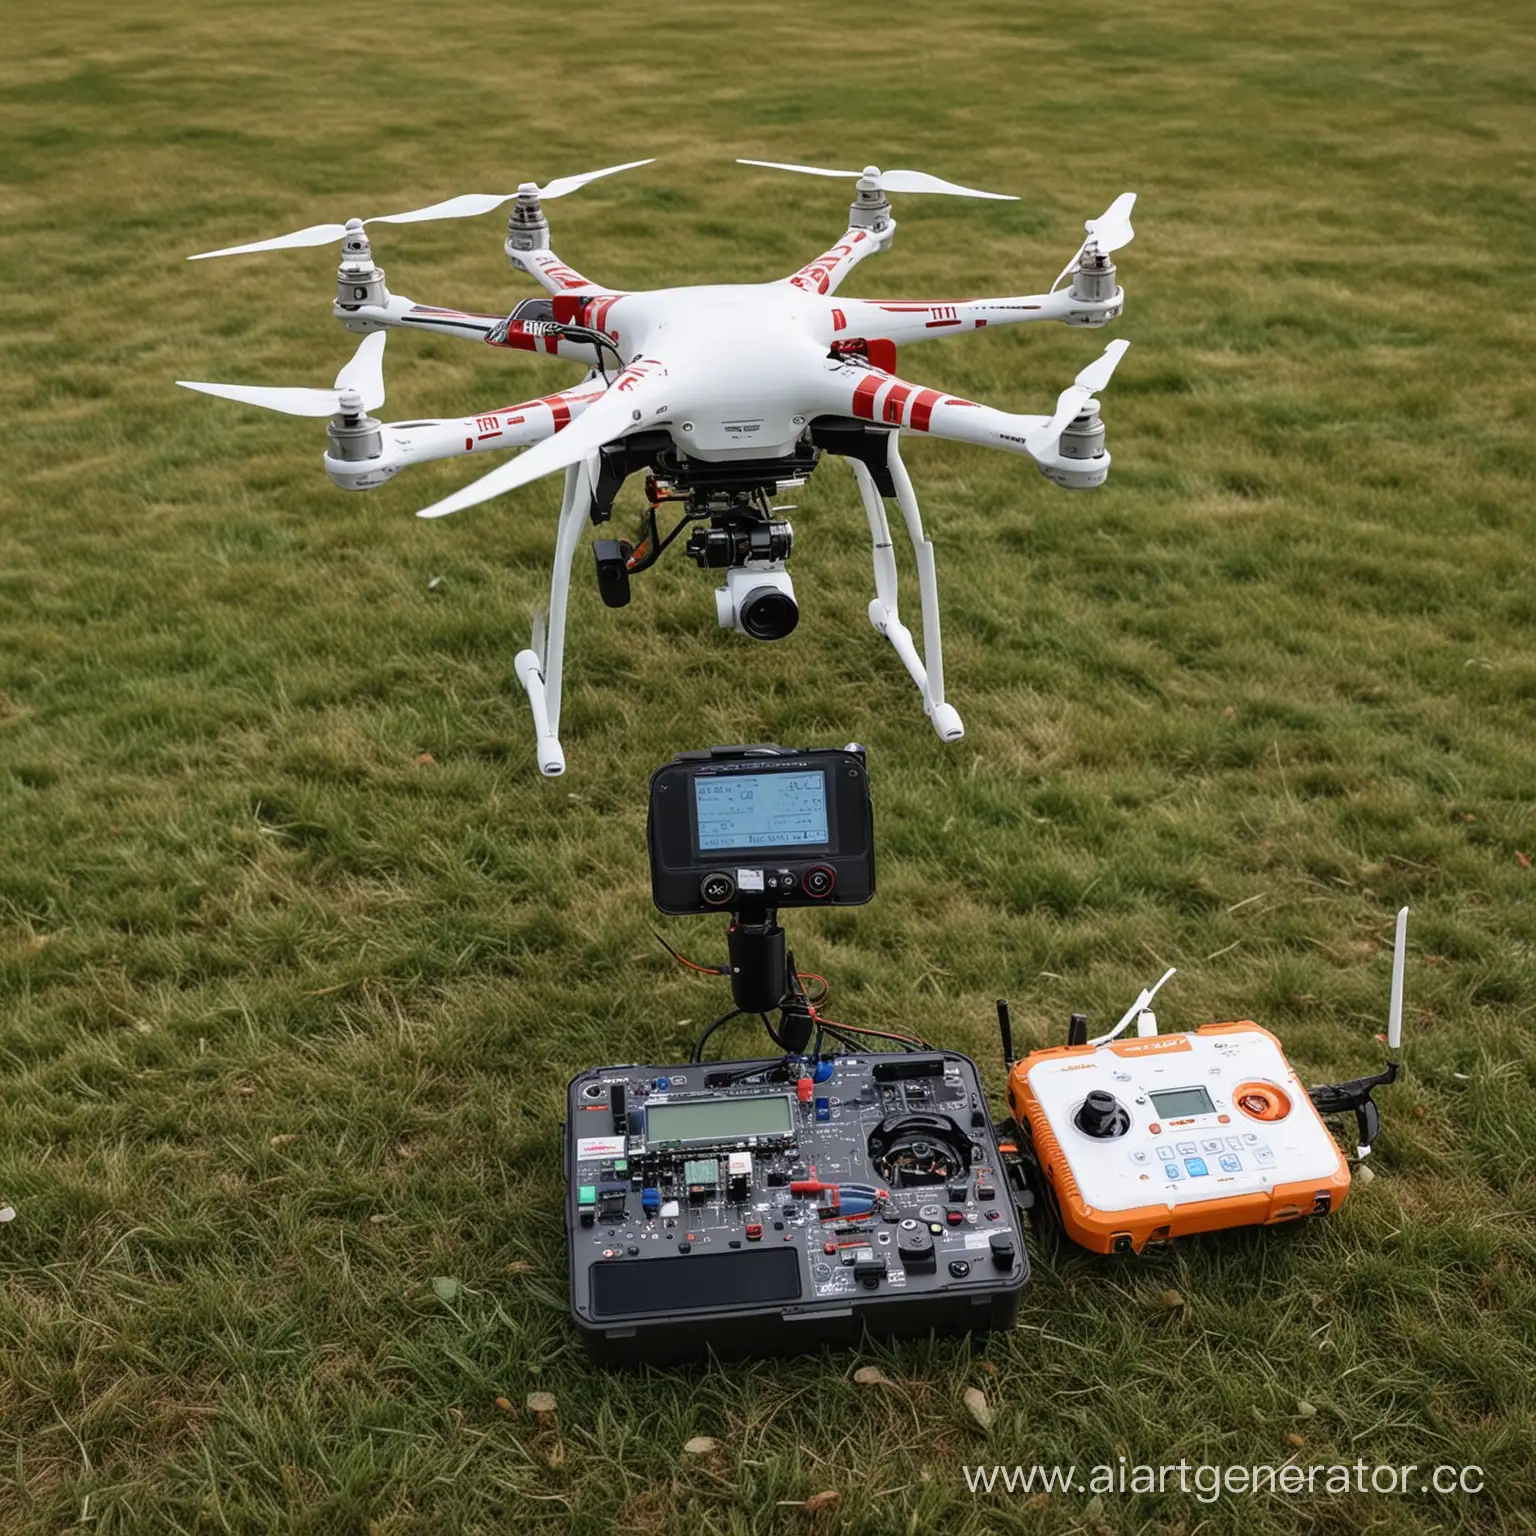 Weather-Station-Controlled-Quadcopter-with-Graph-Display